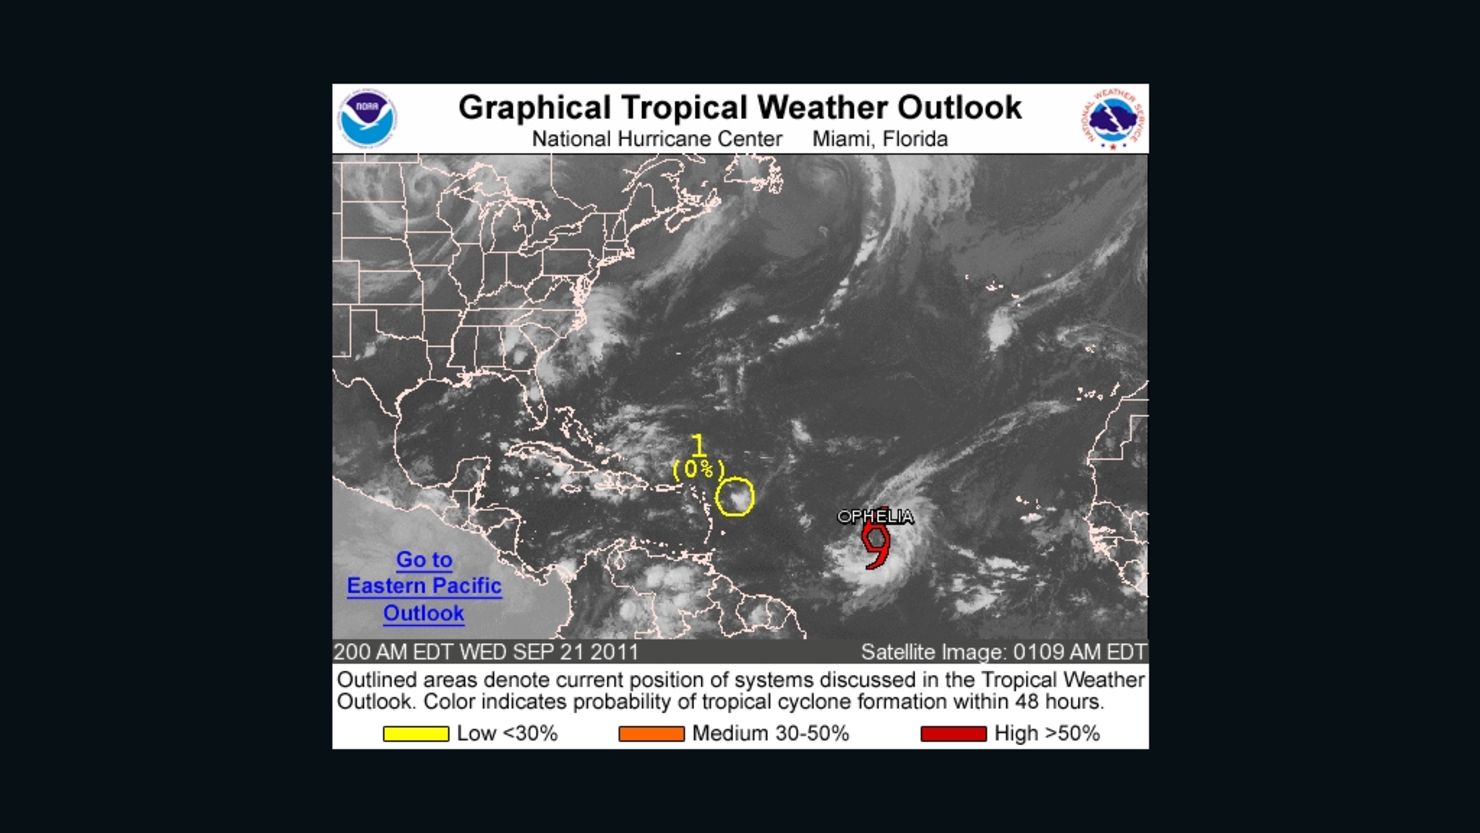 Ophelia was in the central Atlantic early Thursday, but posed no immediate threat to land